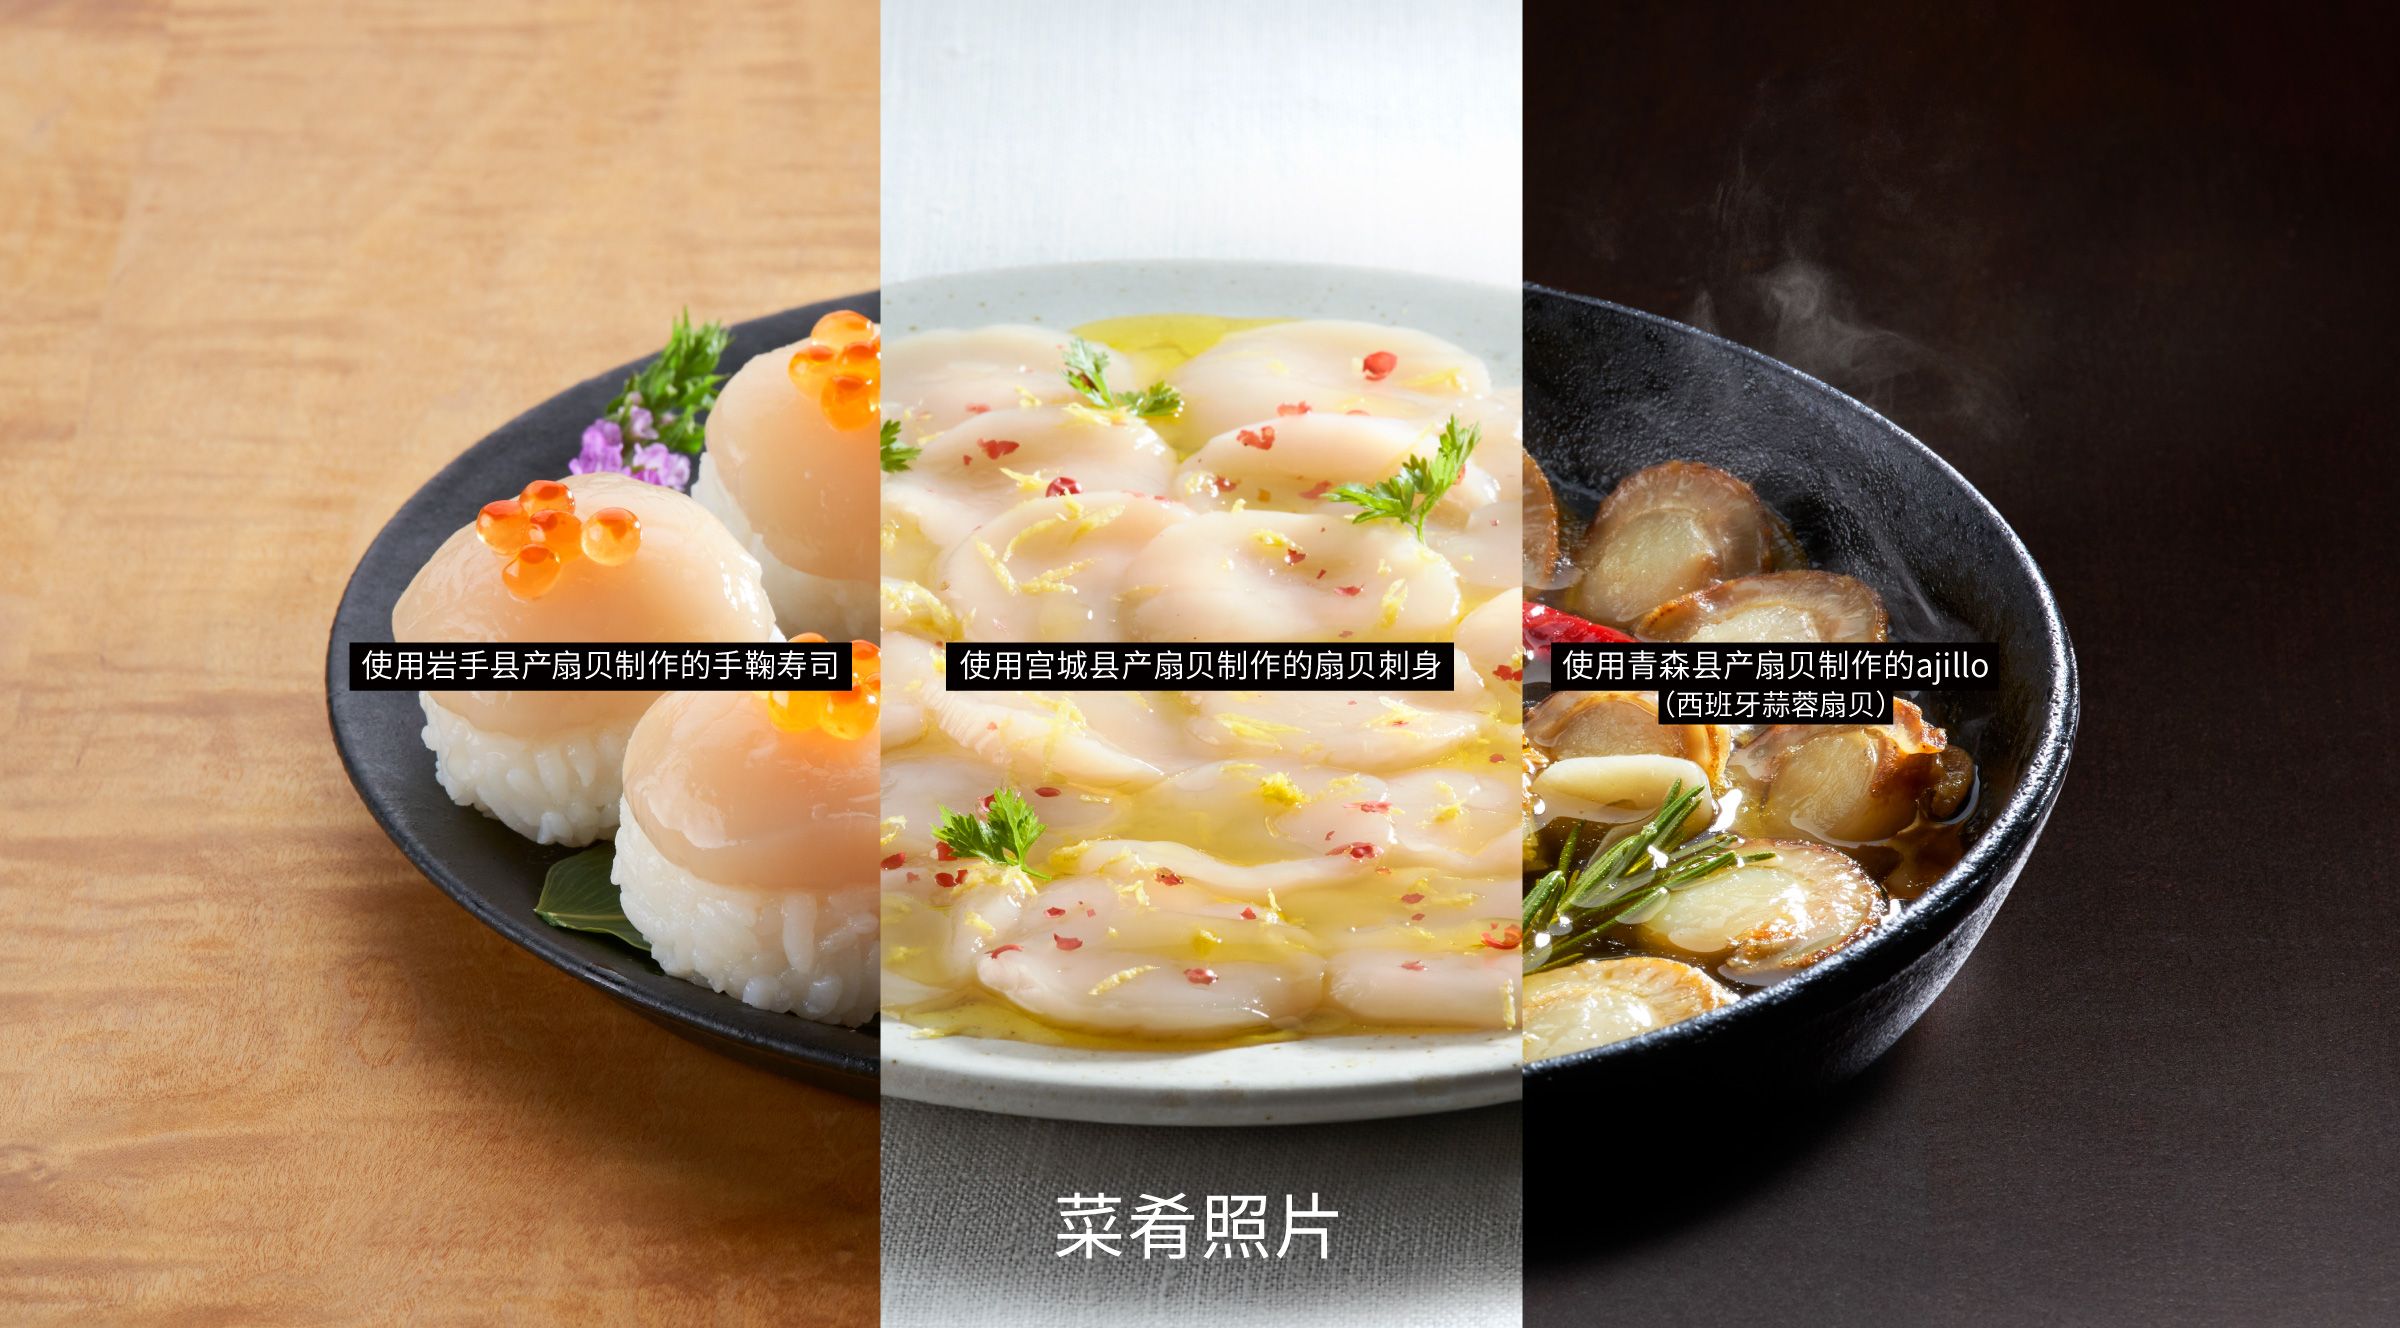 Photos of cuisine starring scallops from Japan